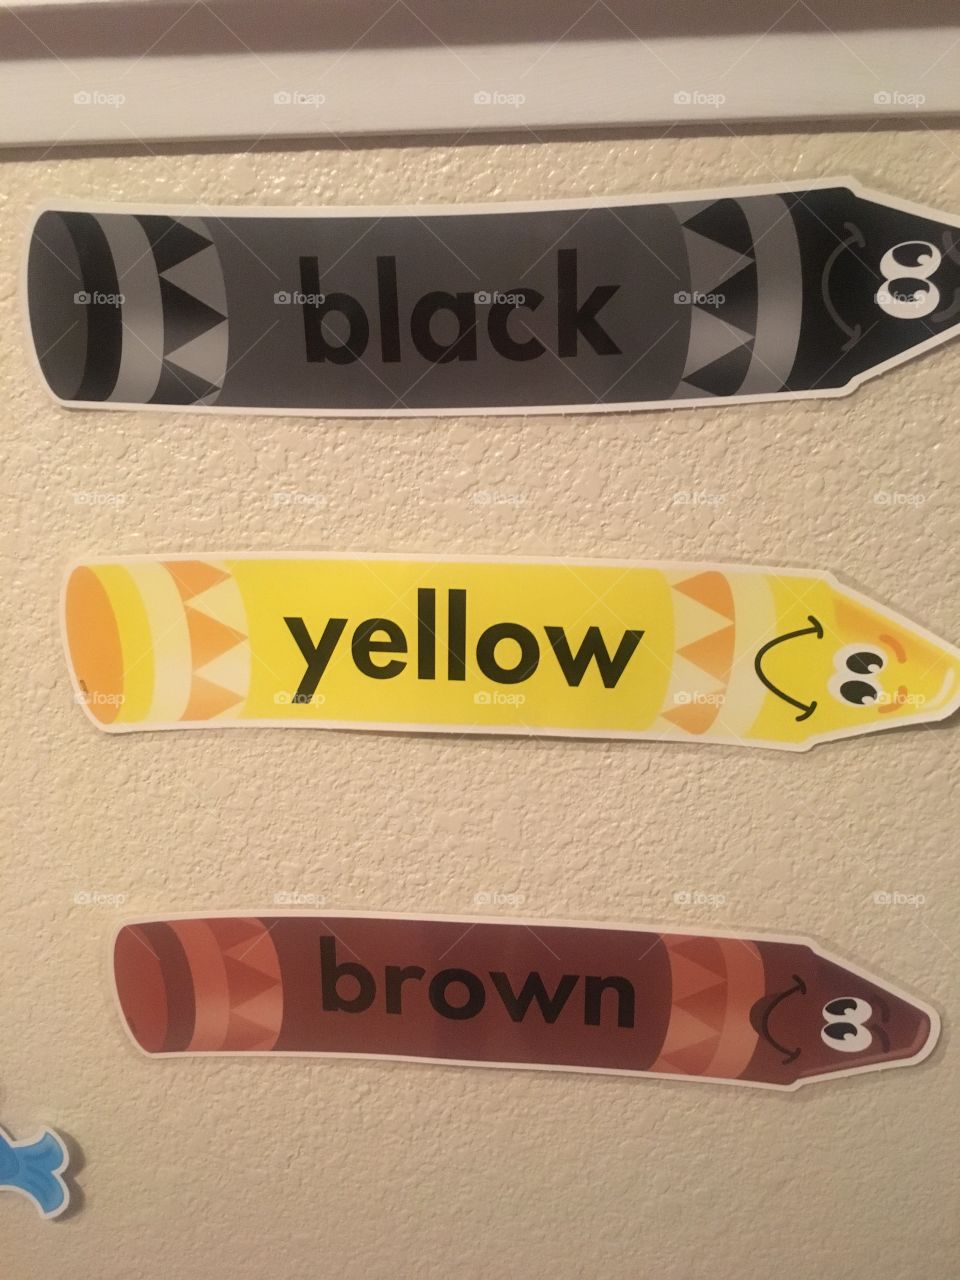 It has the colors black, yellow, and brown,for kids can learn those colors,